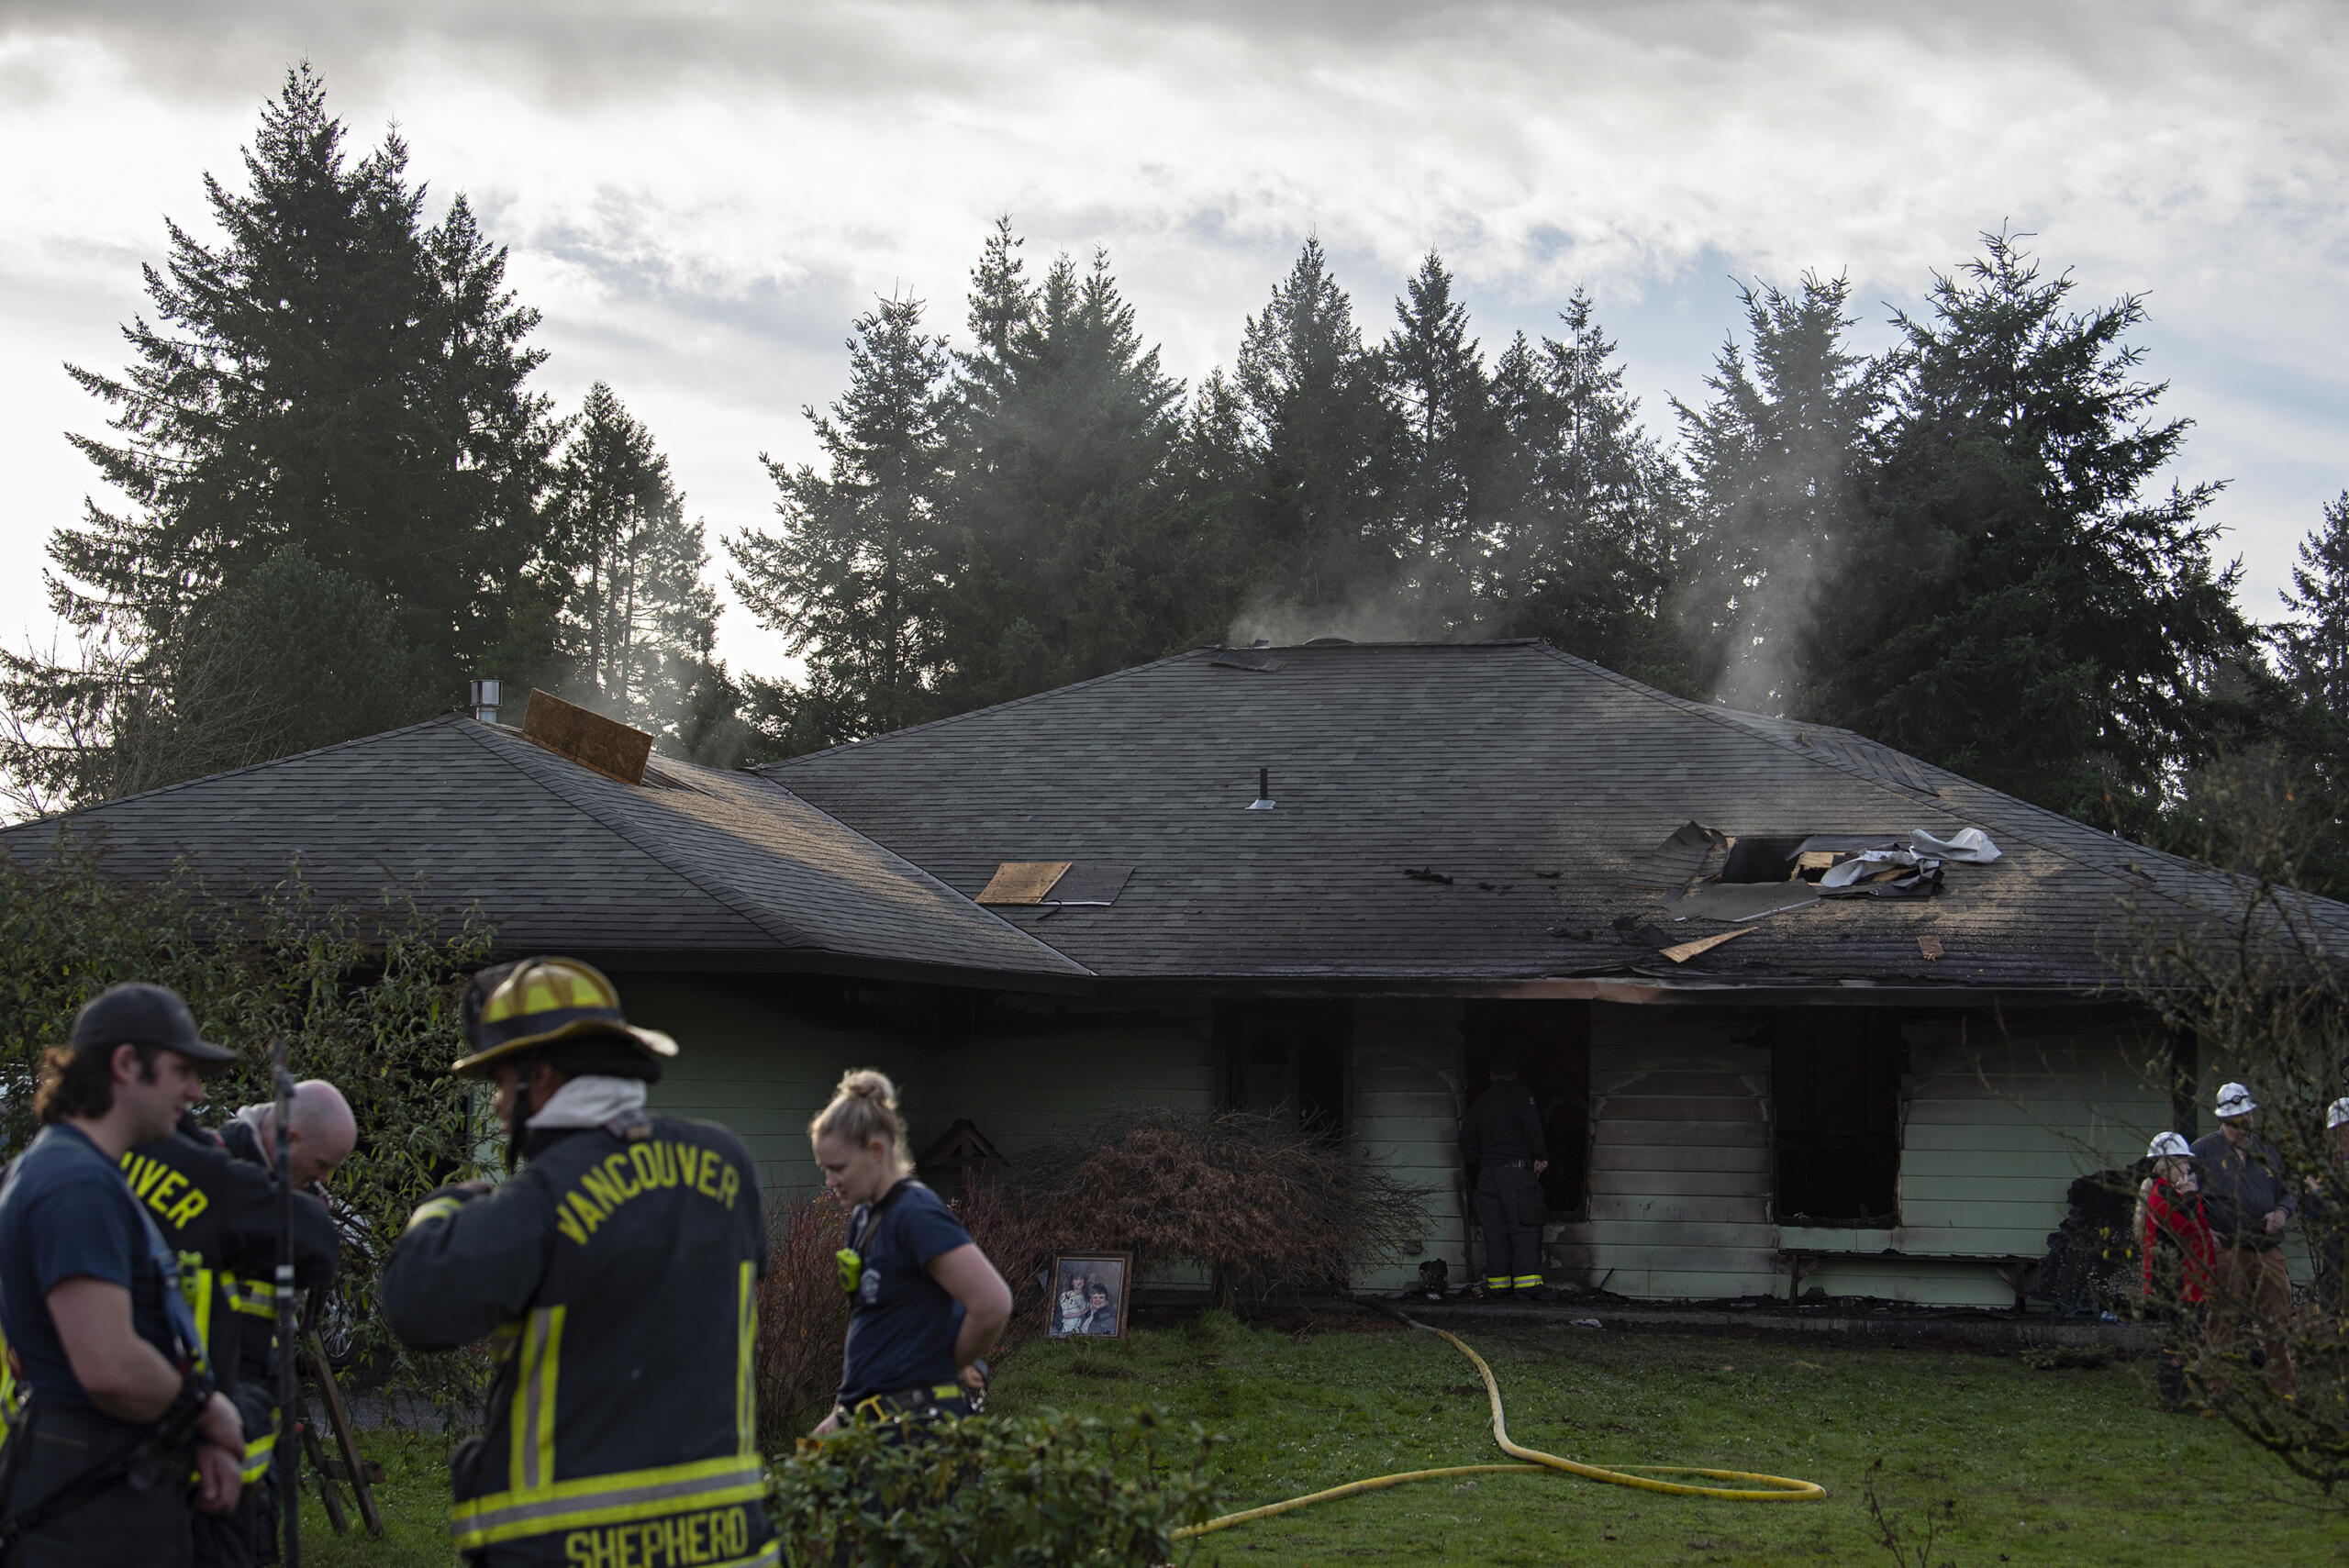 A woman died in a house fire in Orchards after fire crews found her in a bedroom and were unable to revive her along Northeast 99th Street on Thursday morning, Dec.2, 2021.